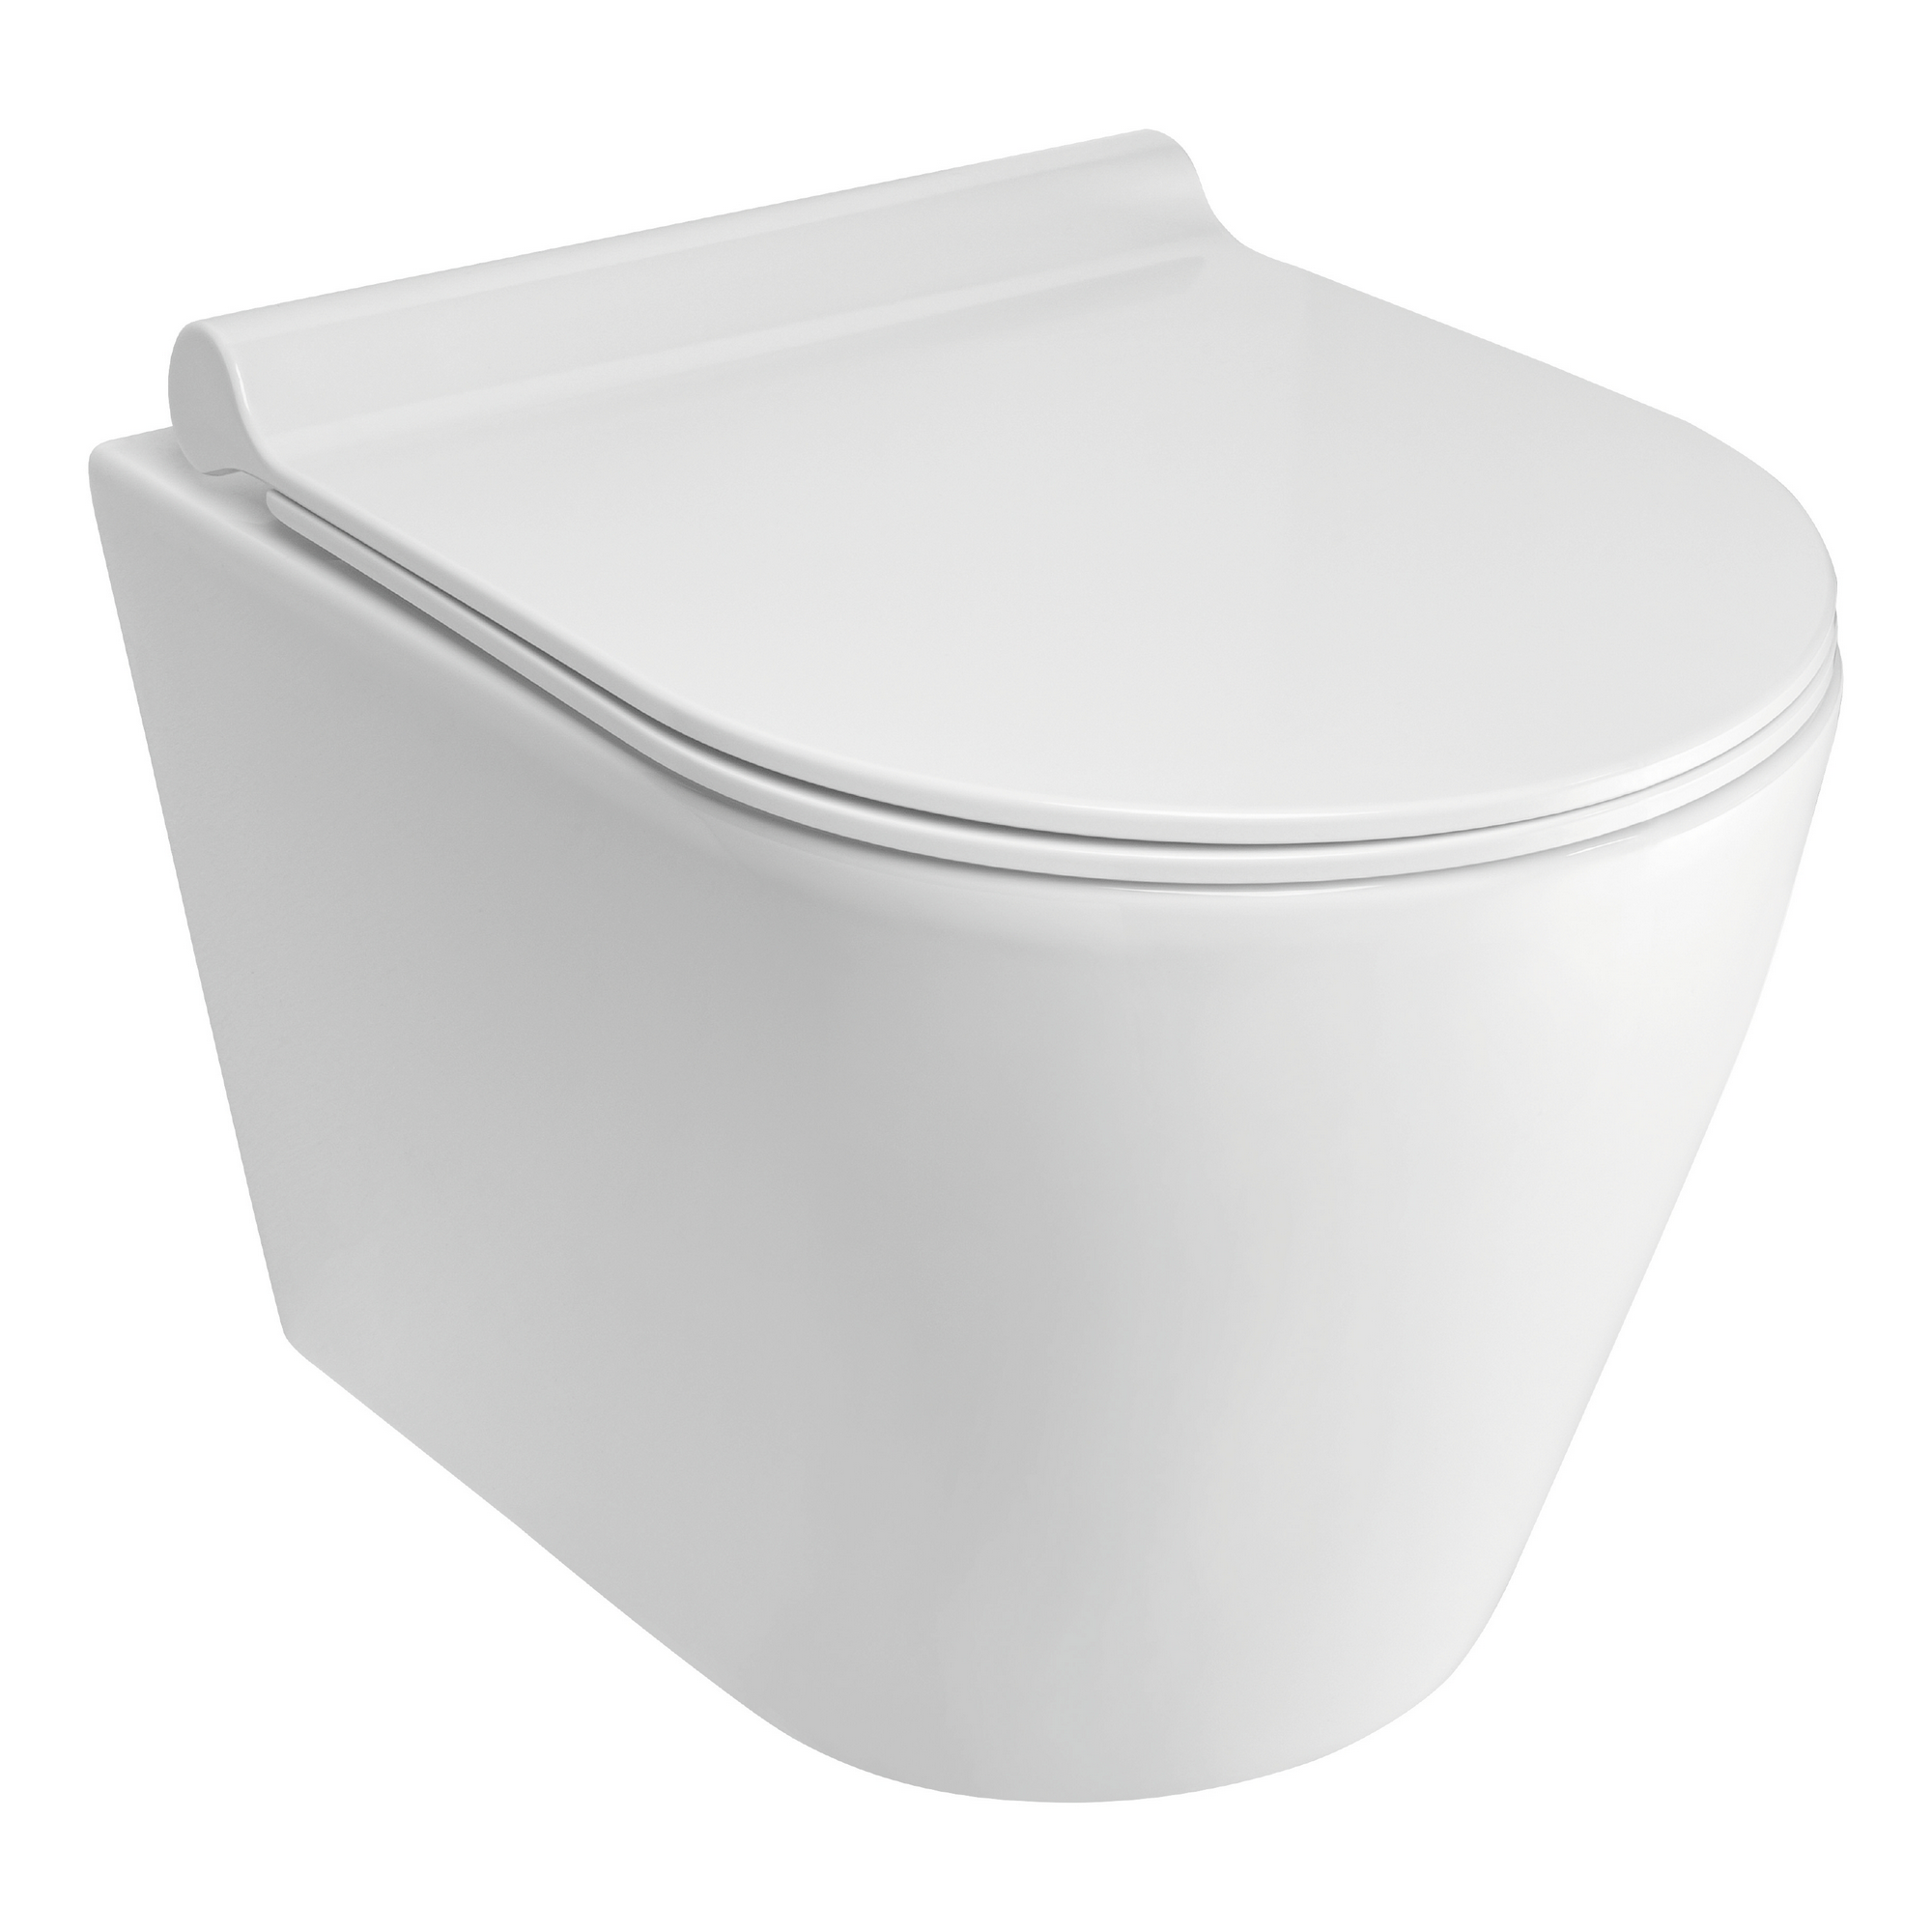 Wand-WC-Set 'Sanremo' weiß 36 x 36 x 48 cm + product picture